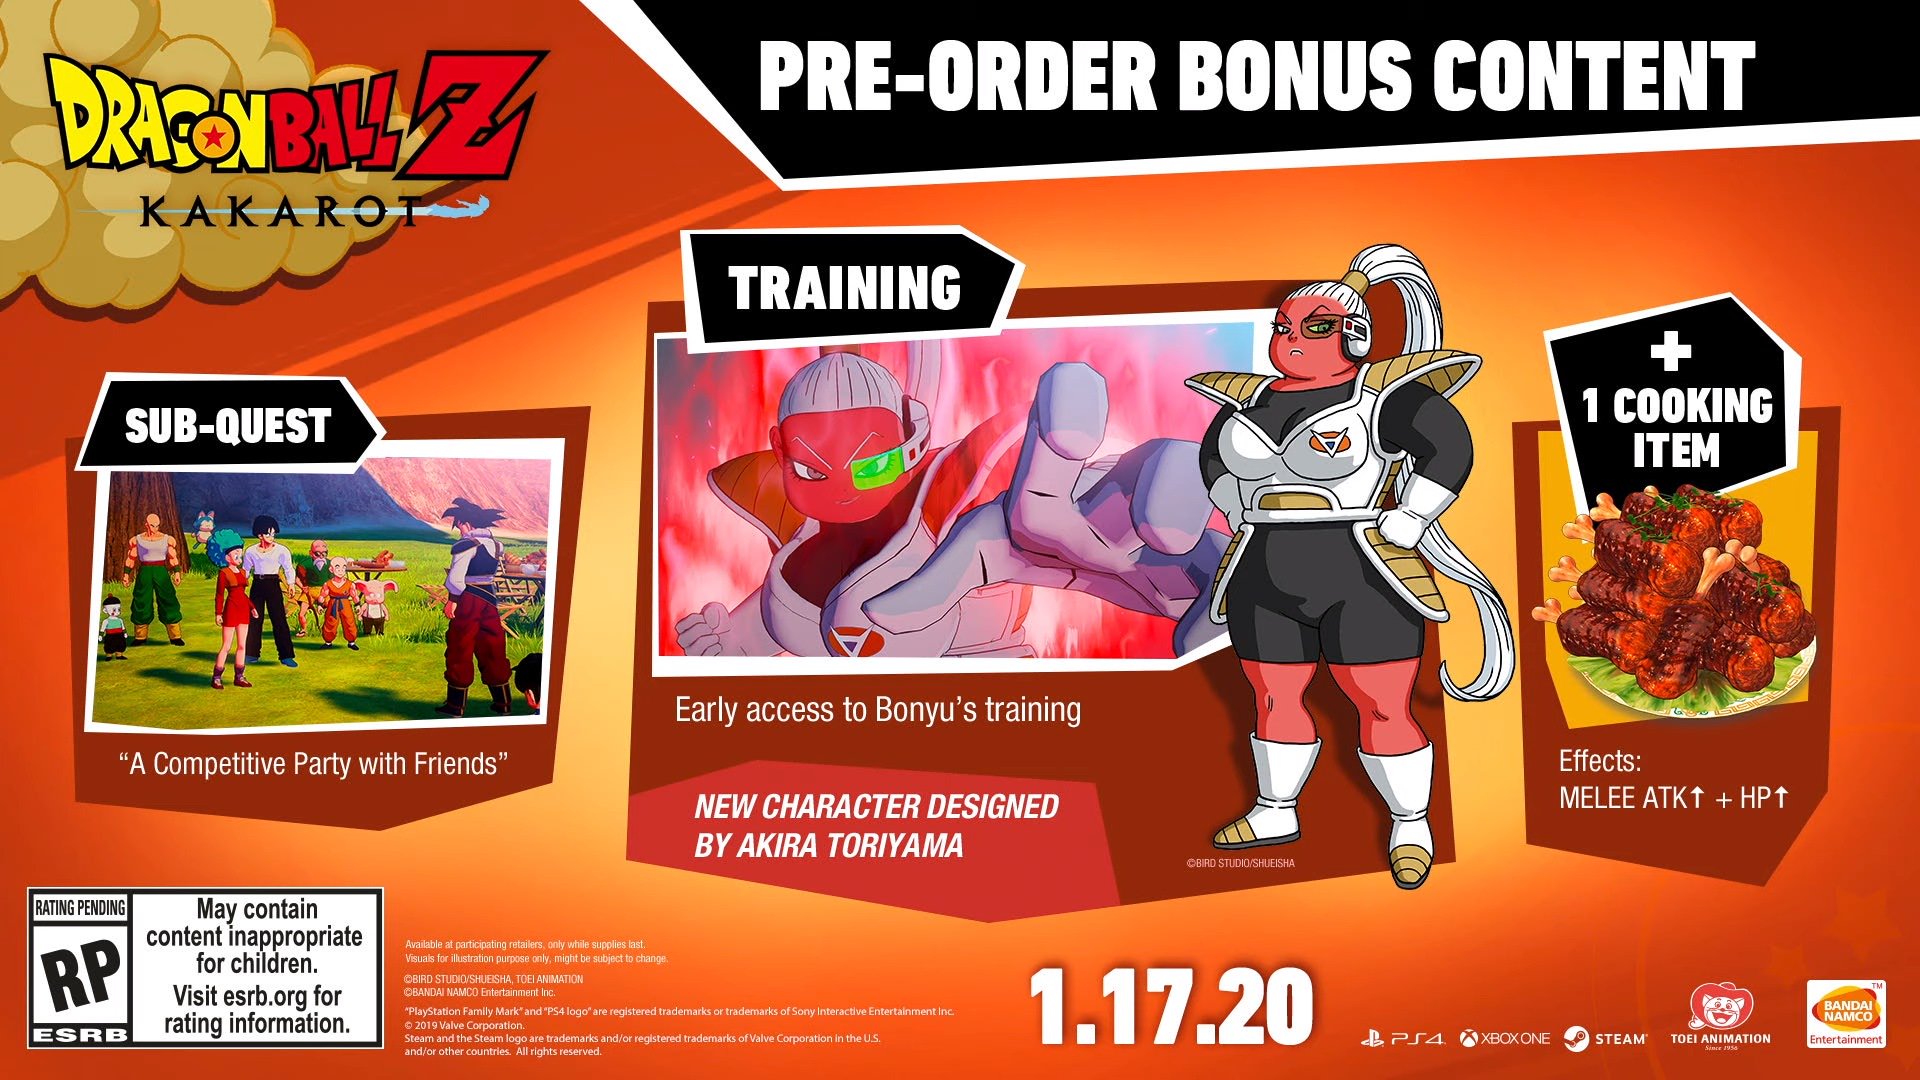 Dragon Ball Xenoverse special edition and Pre-Orders announced